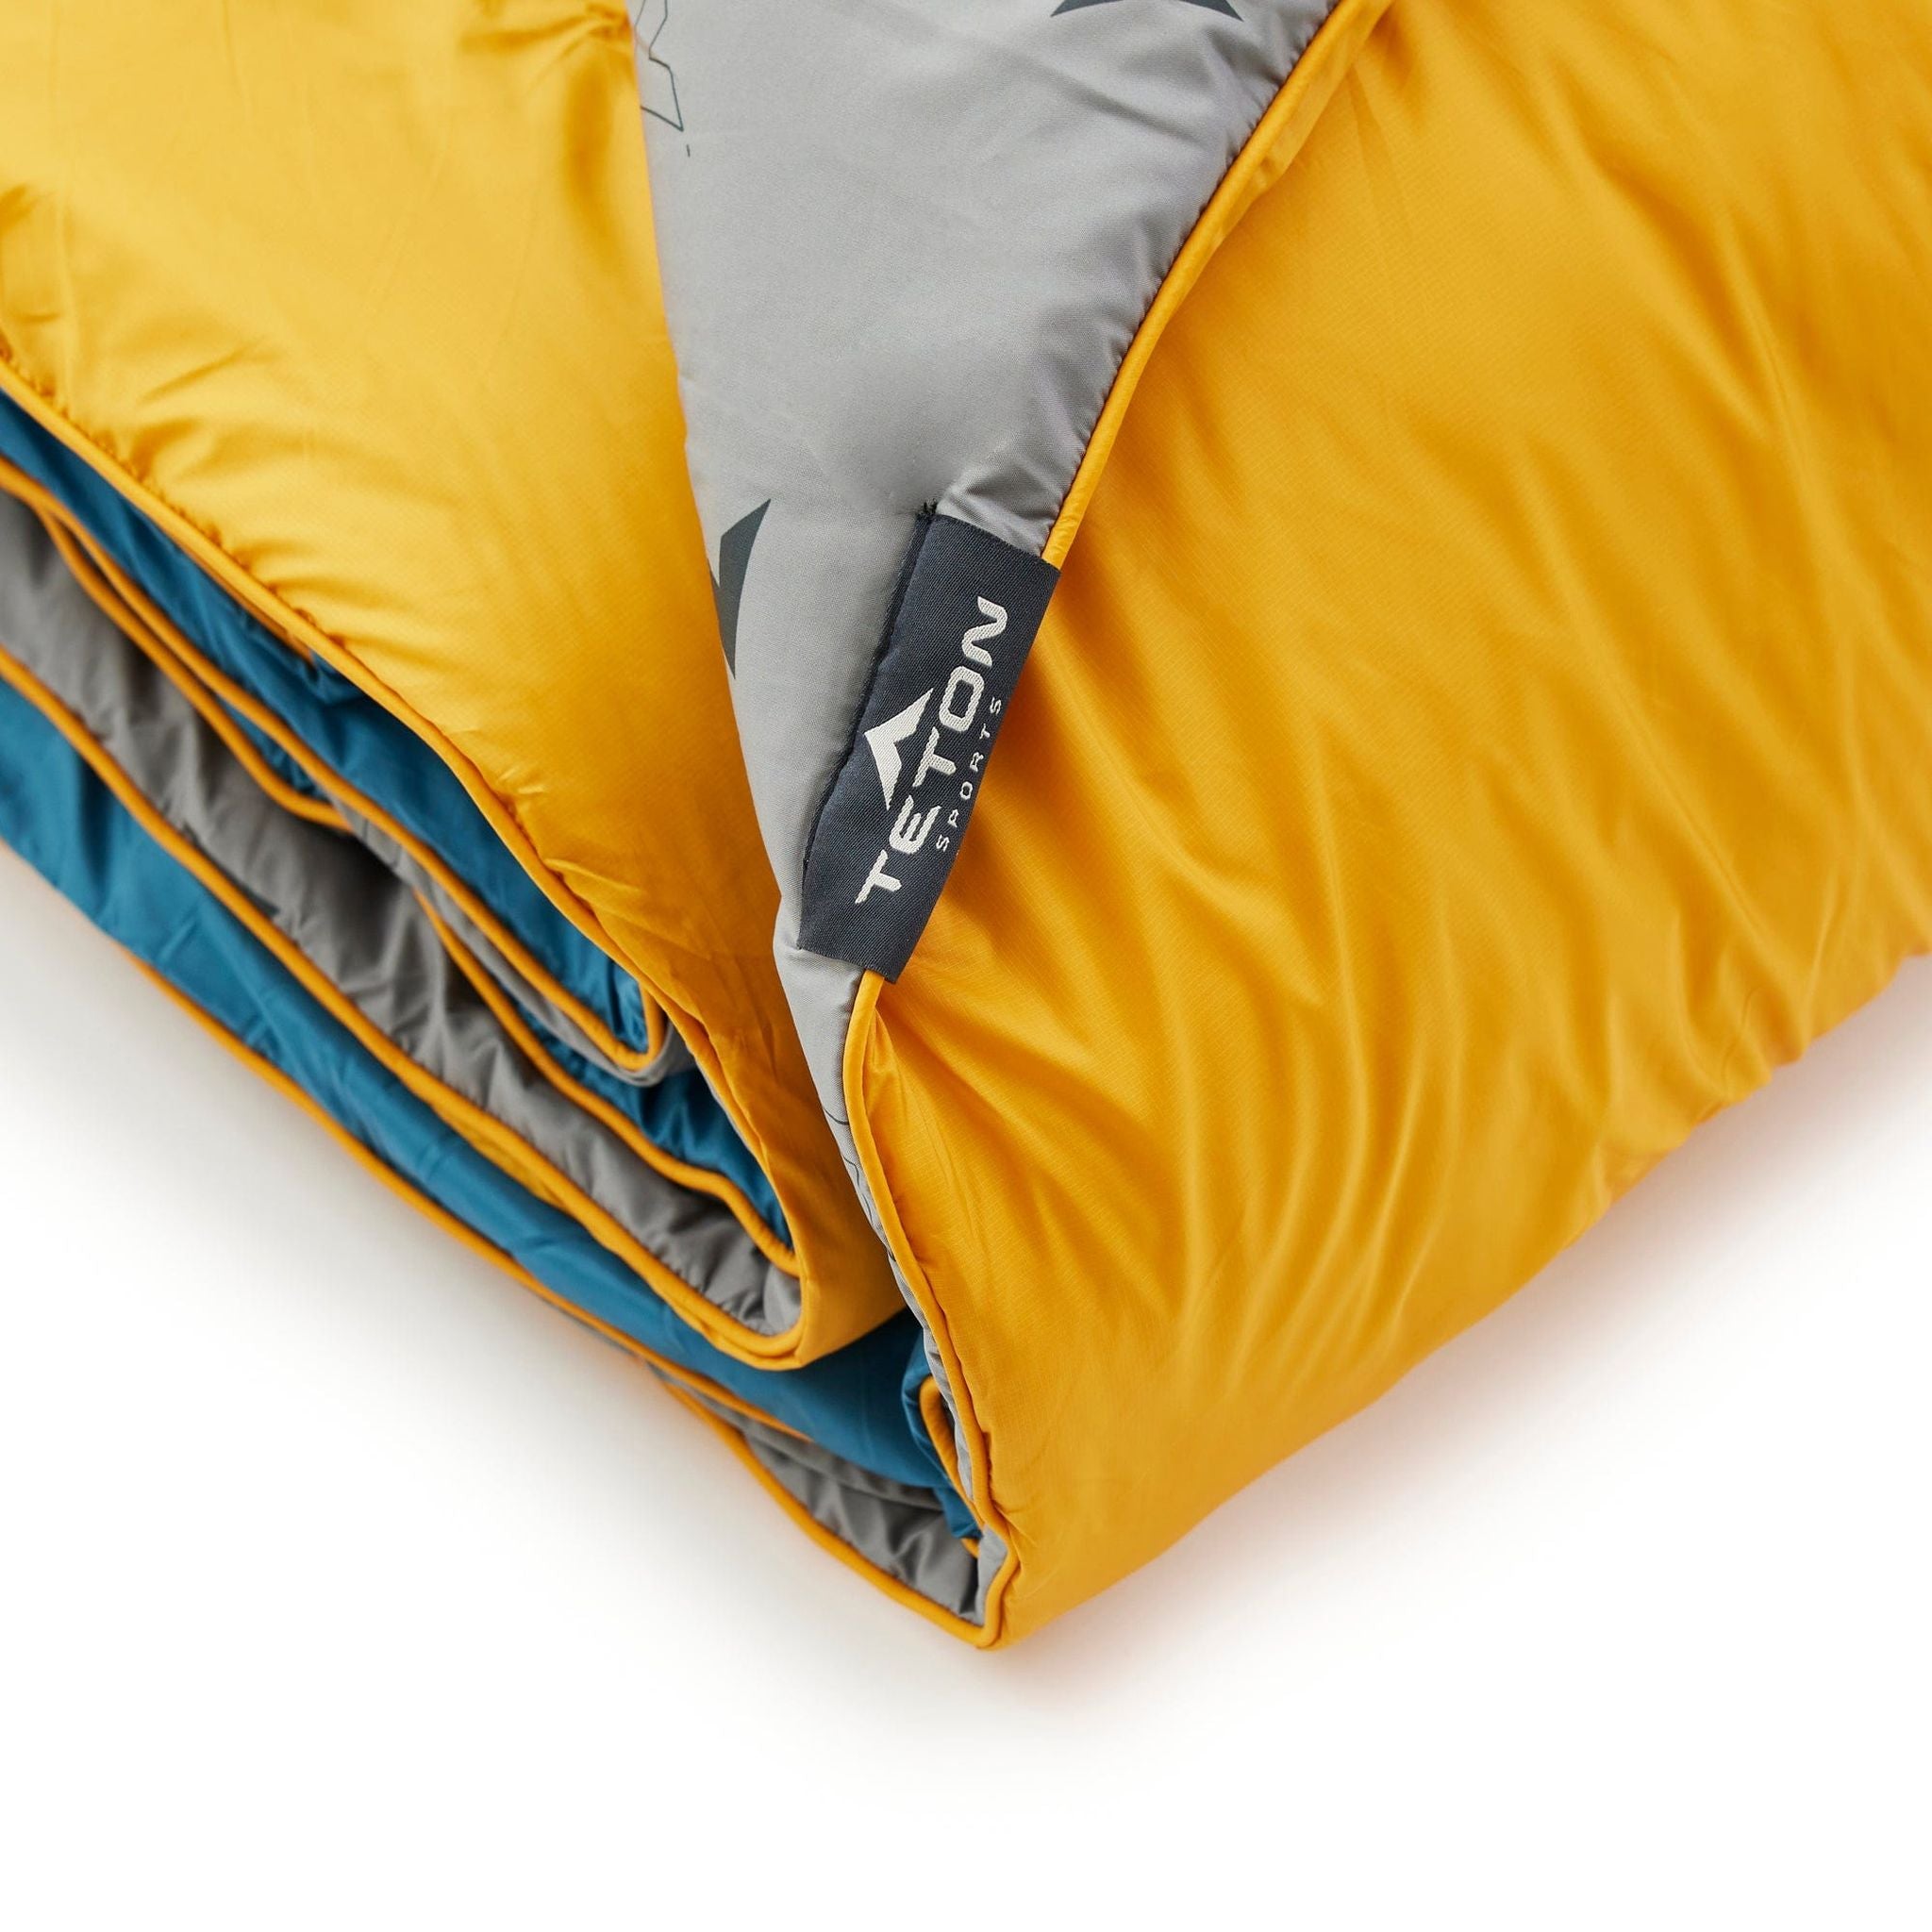 Teton Sports Acadia Mammoth Outdoor Camp Blanket in Goldenrod/Peacock